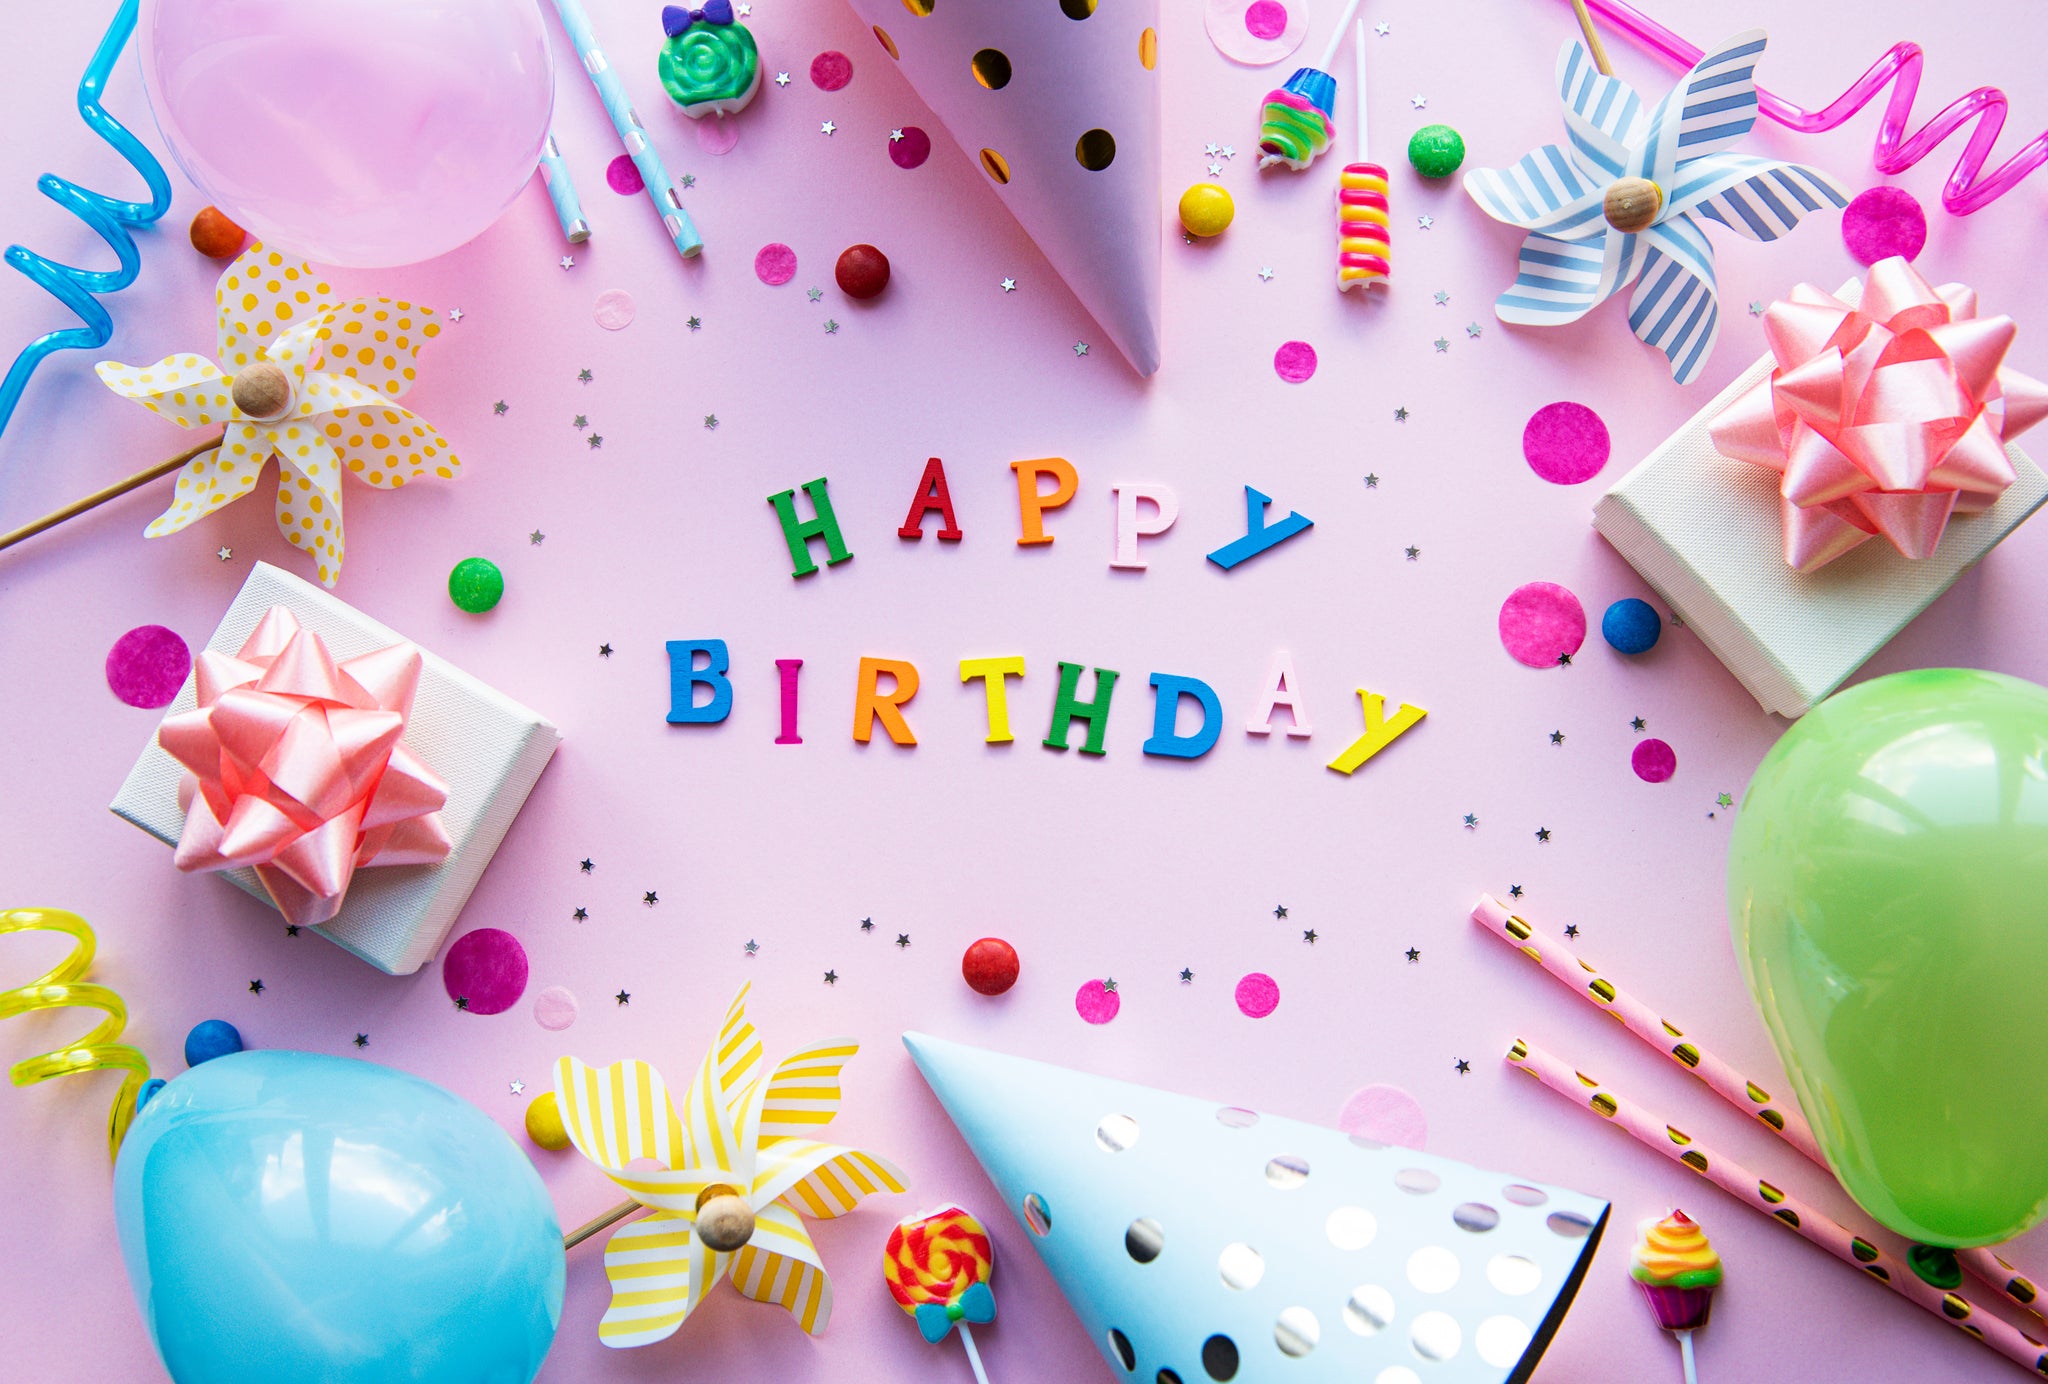 18 Creative Birthday Party Ideas for Adults, Teens, & Kids – Mrs. Fields